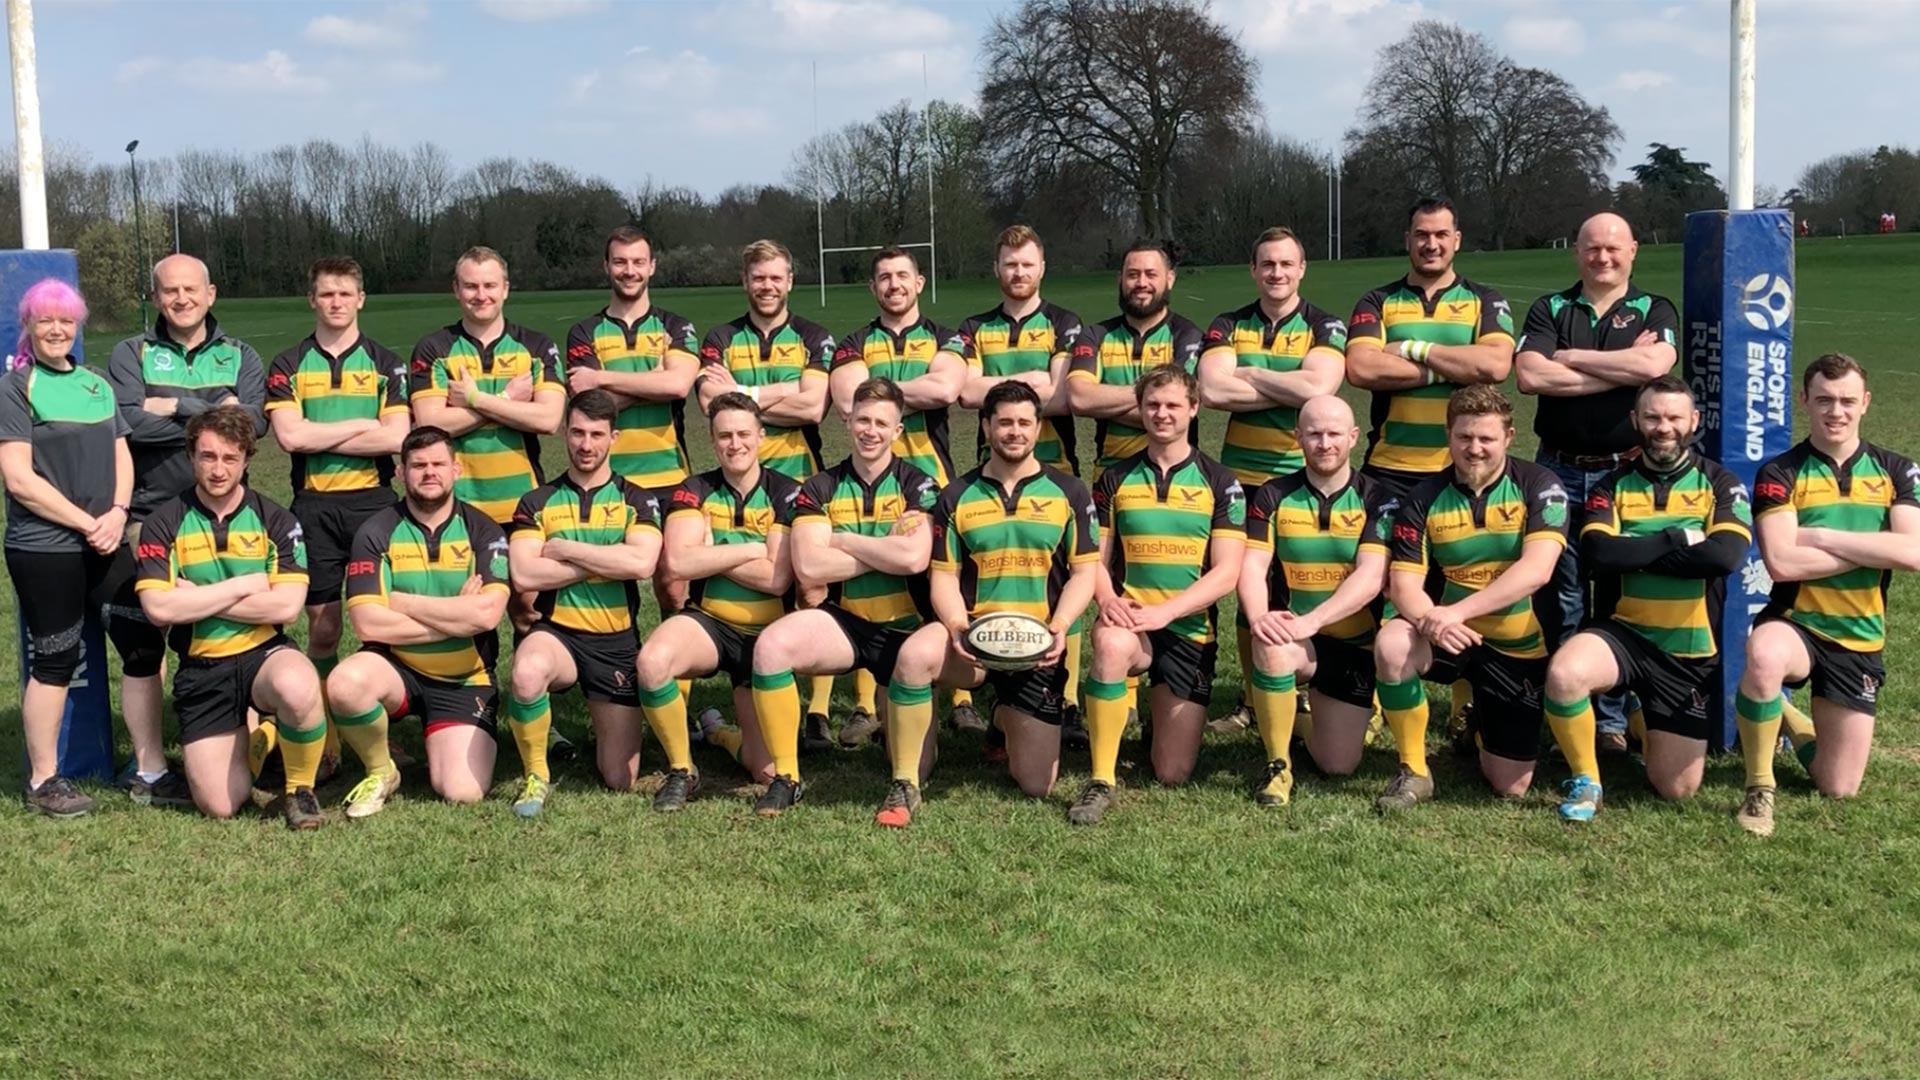 1st XV in Surrey Cup Final v Chobham 1XV on 7 May at Esher RFC